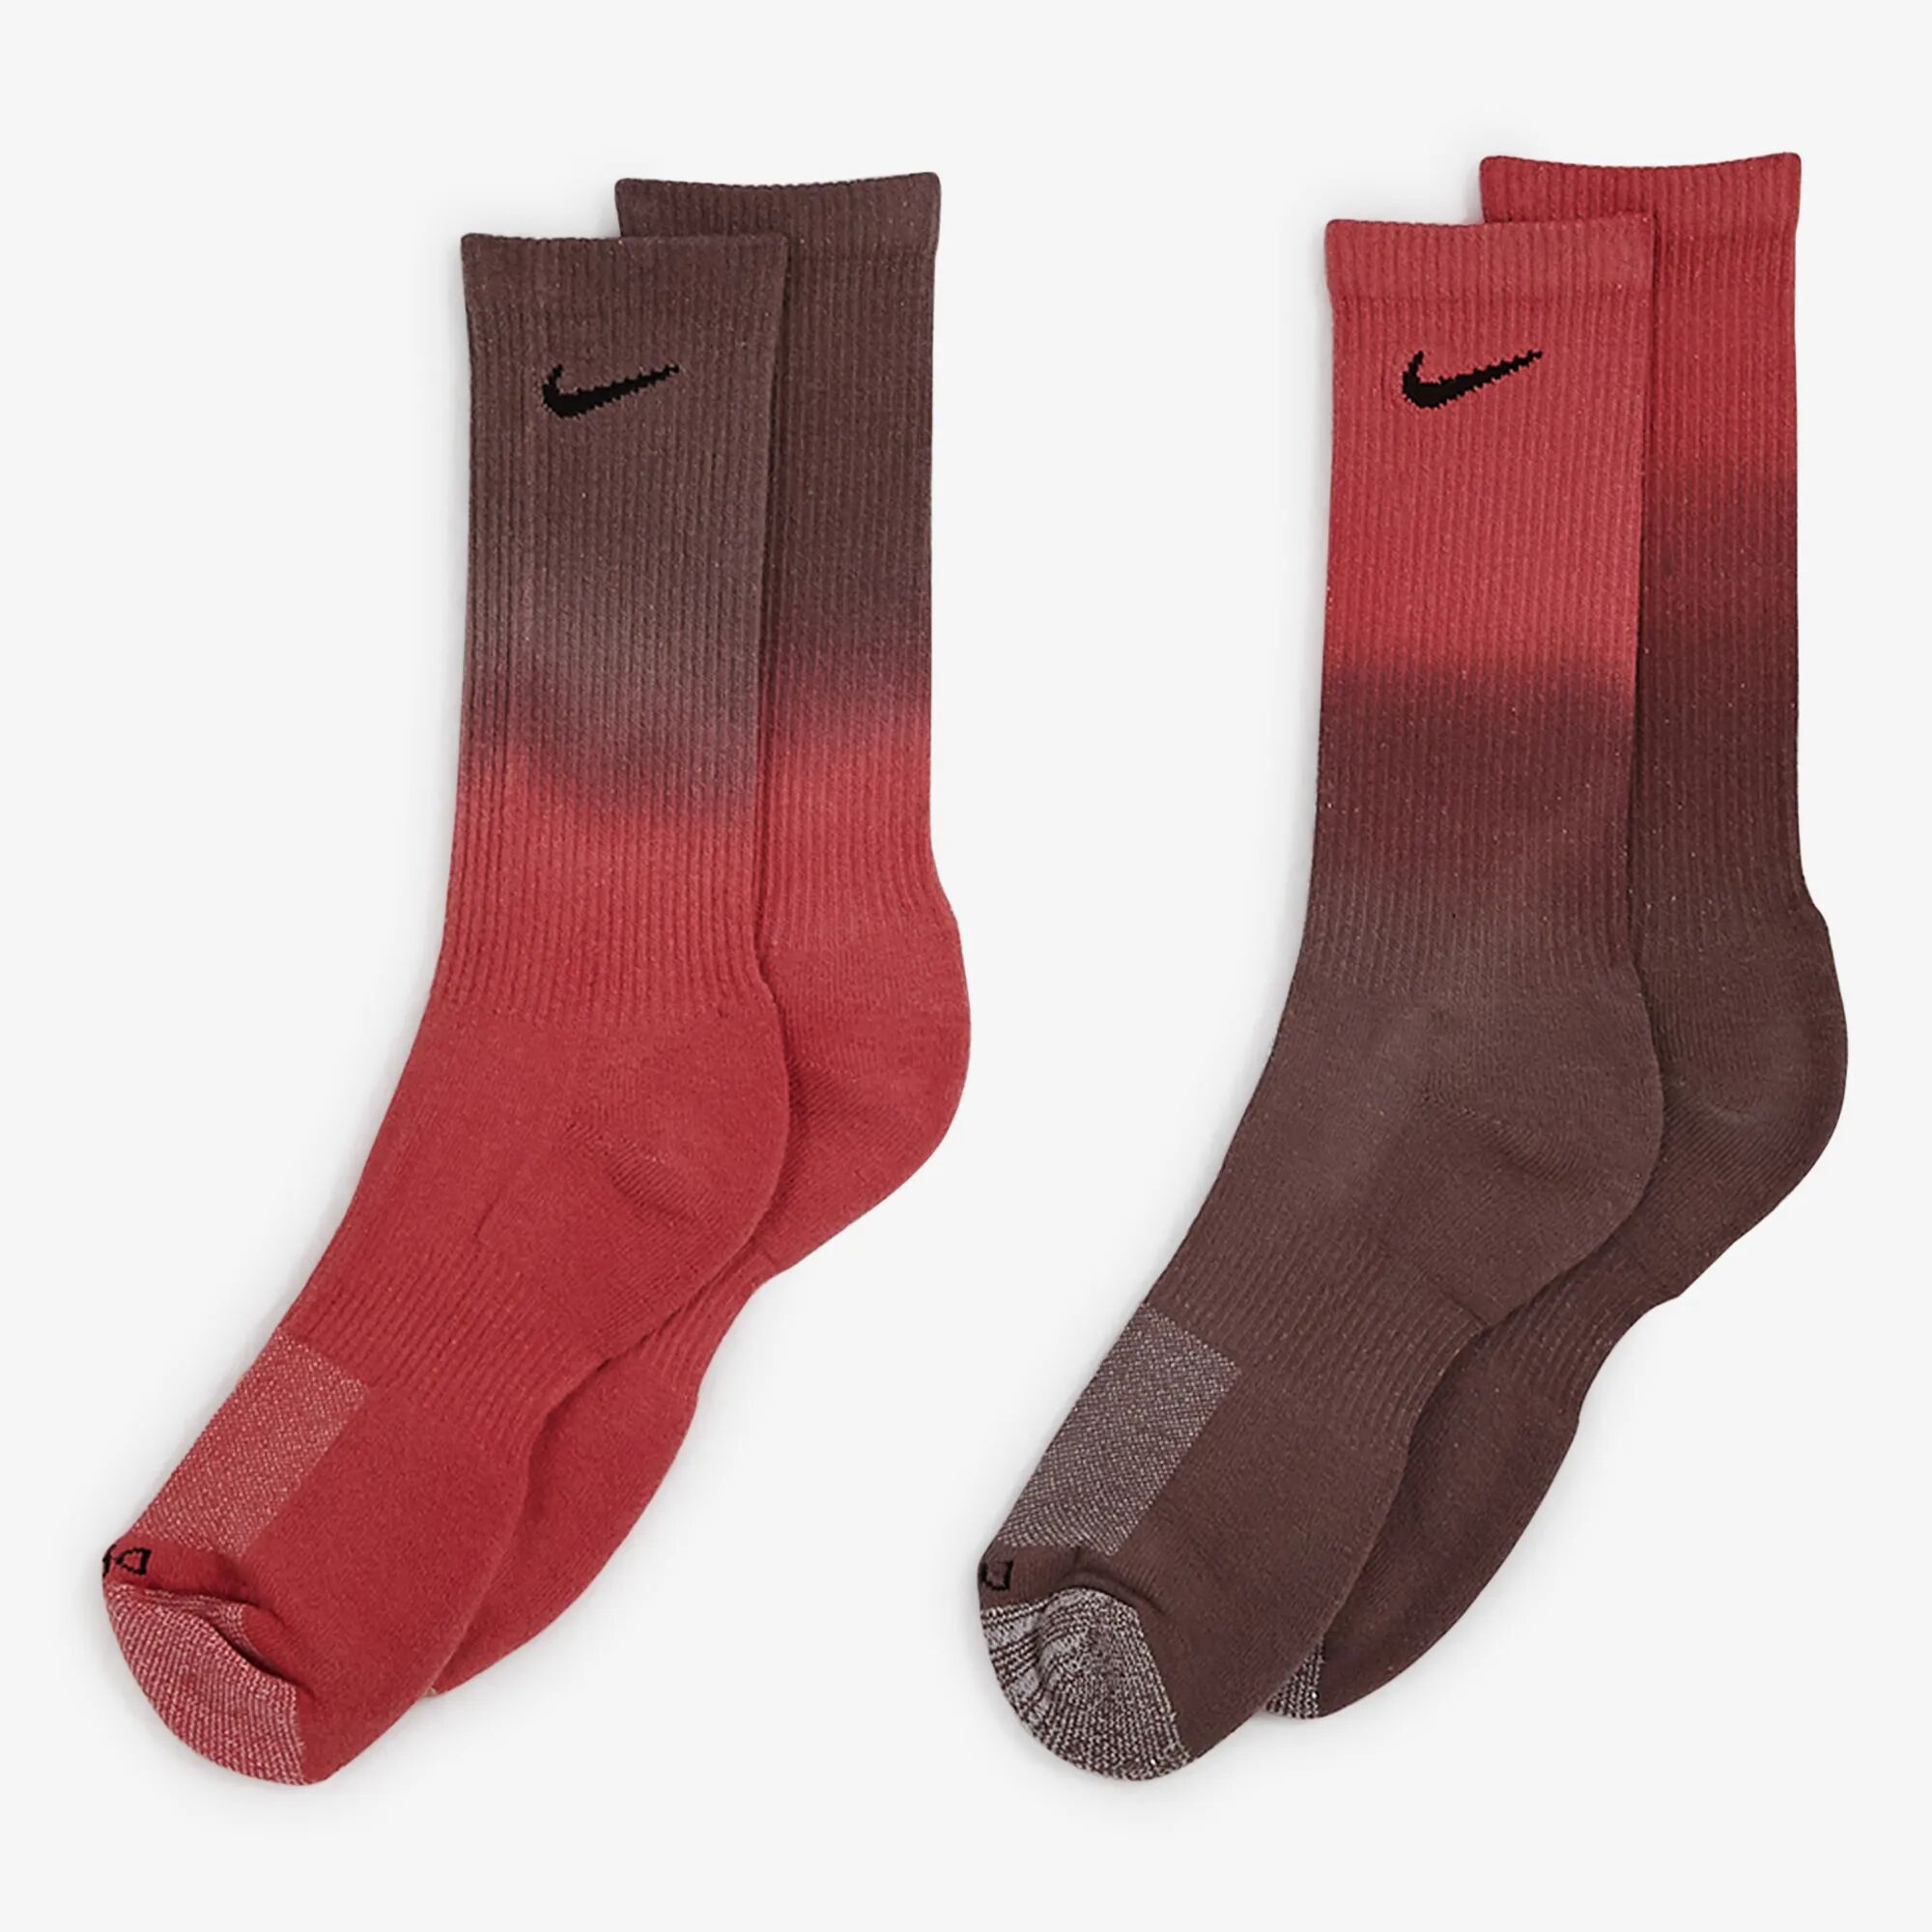 Nike Chaussettes X2 Crew Tie Dye rouge 43/46 homme